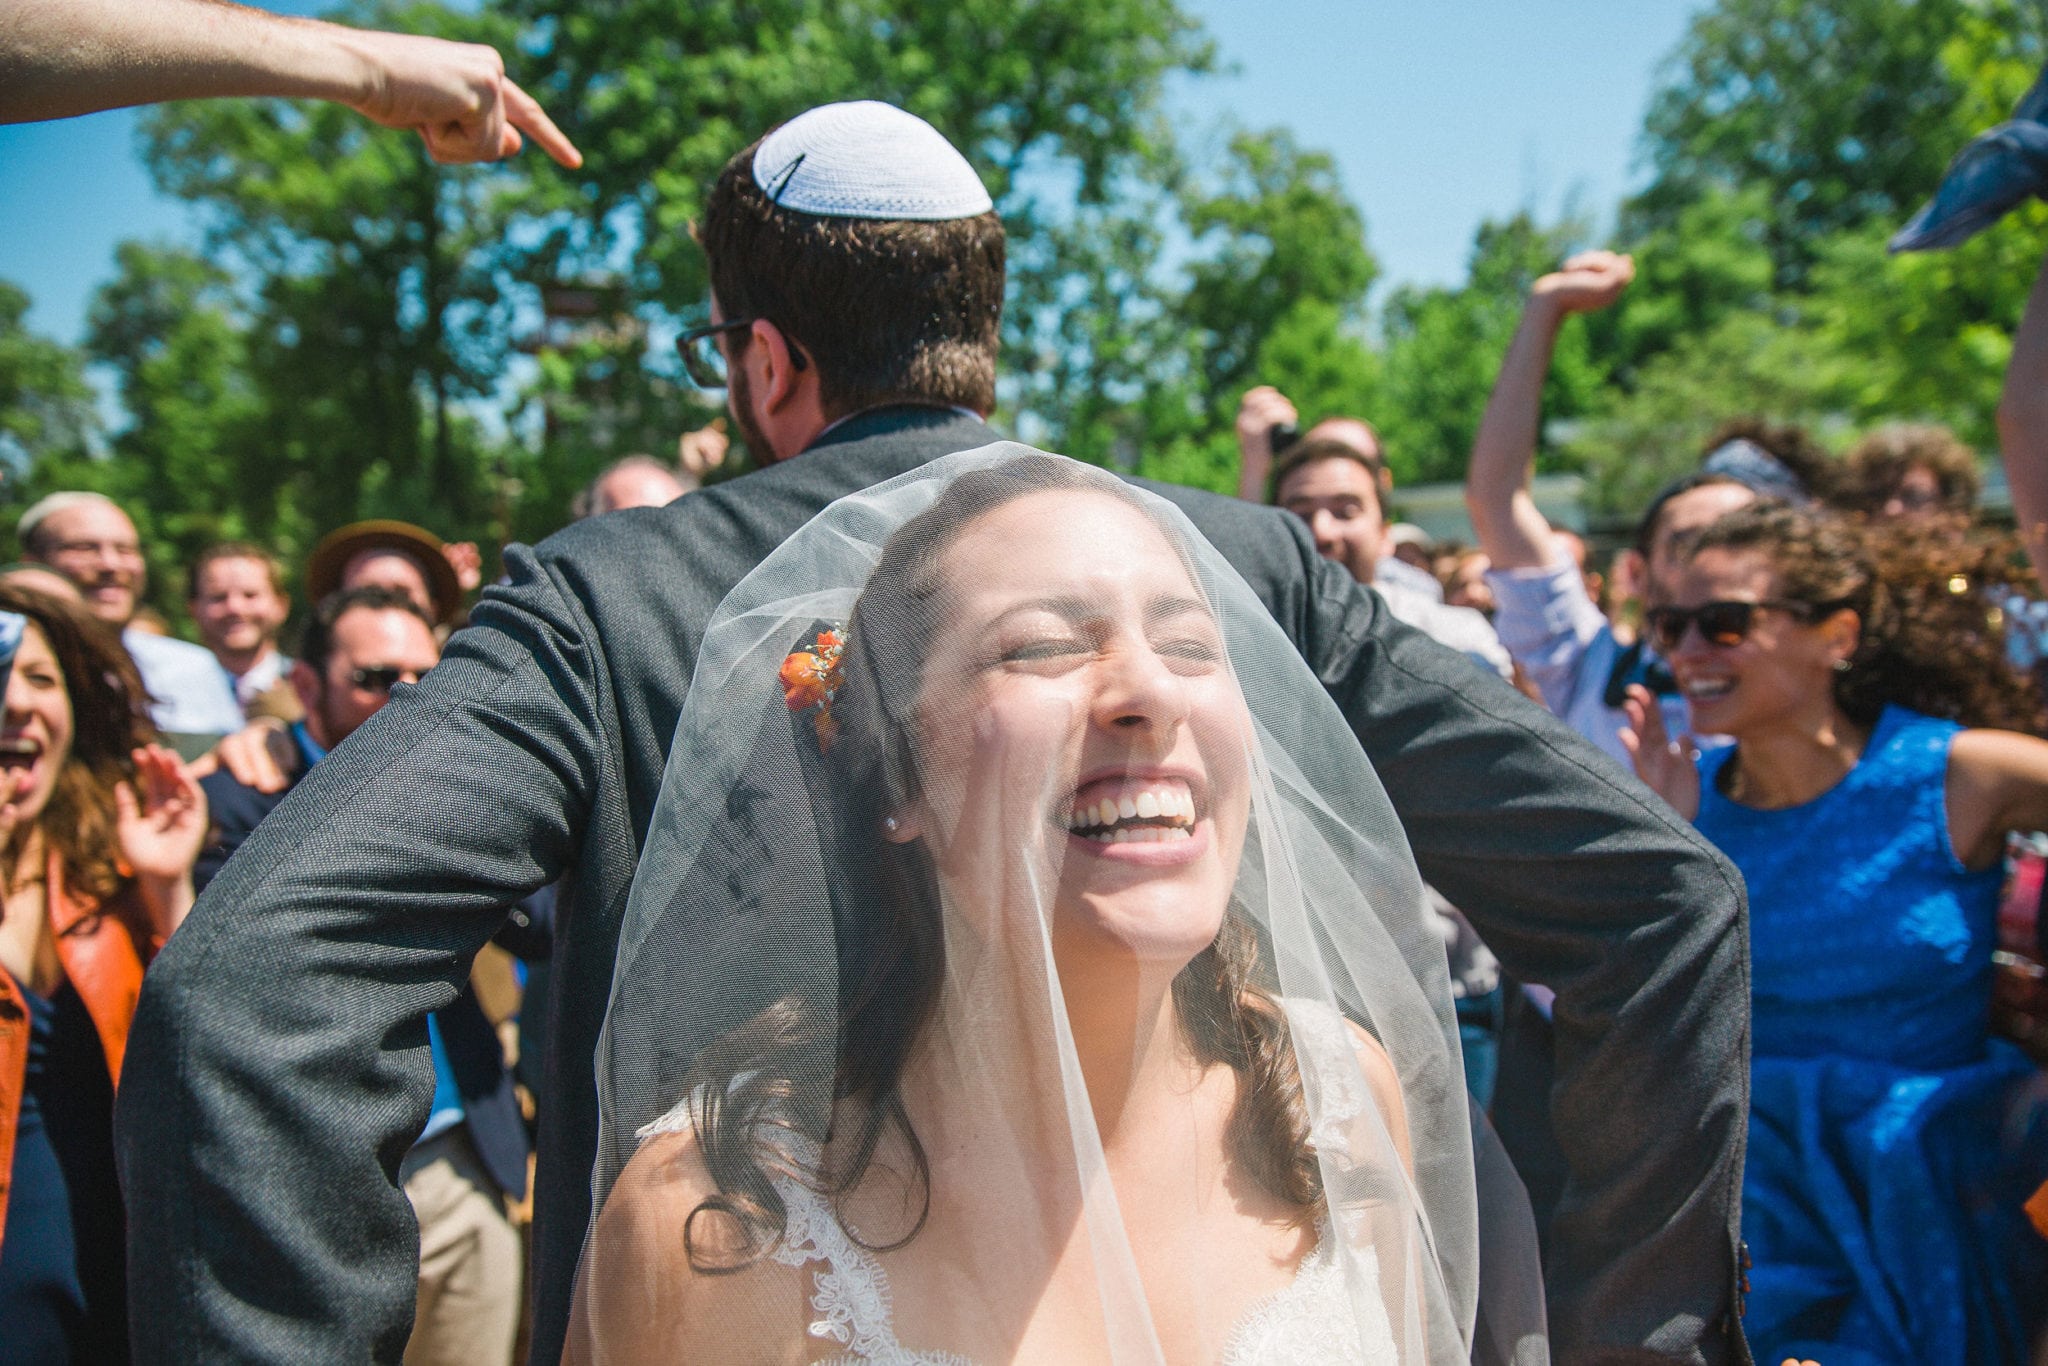 a bride under a veil laughs with her eyes closed with her back to the groom in a yarmulke, surrounded by family and friends outside